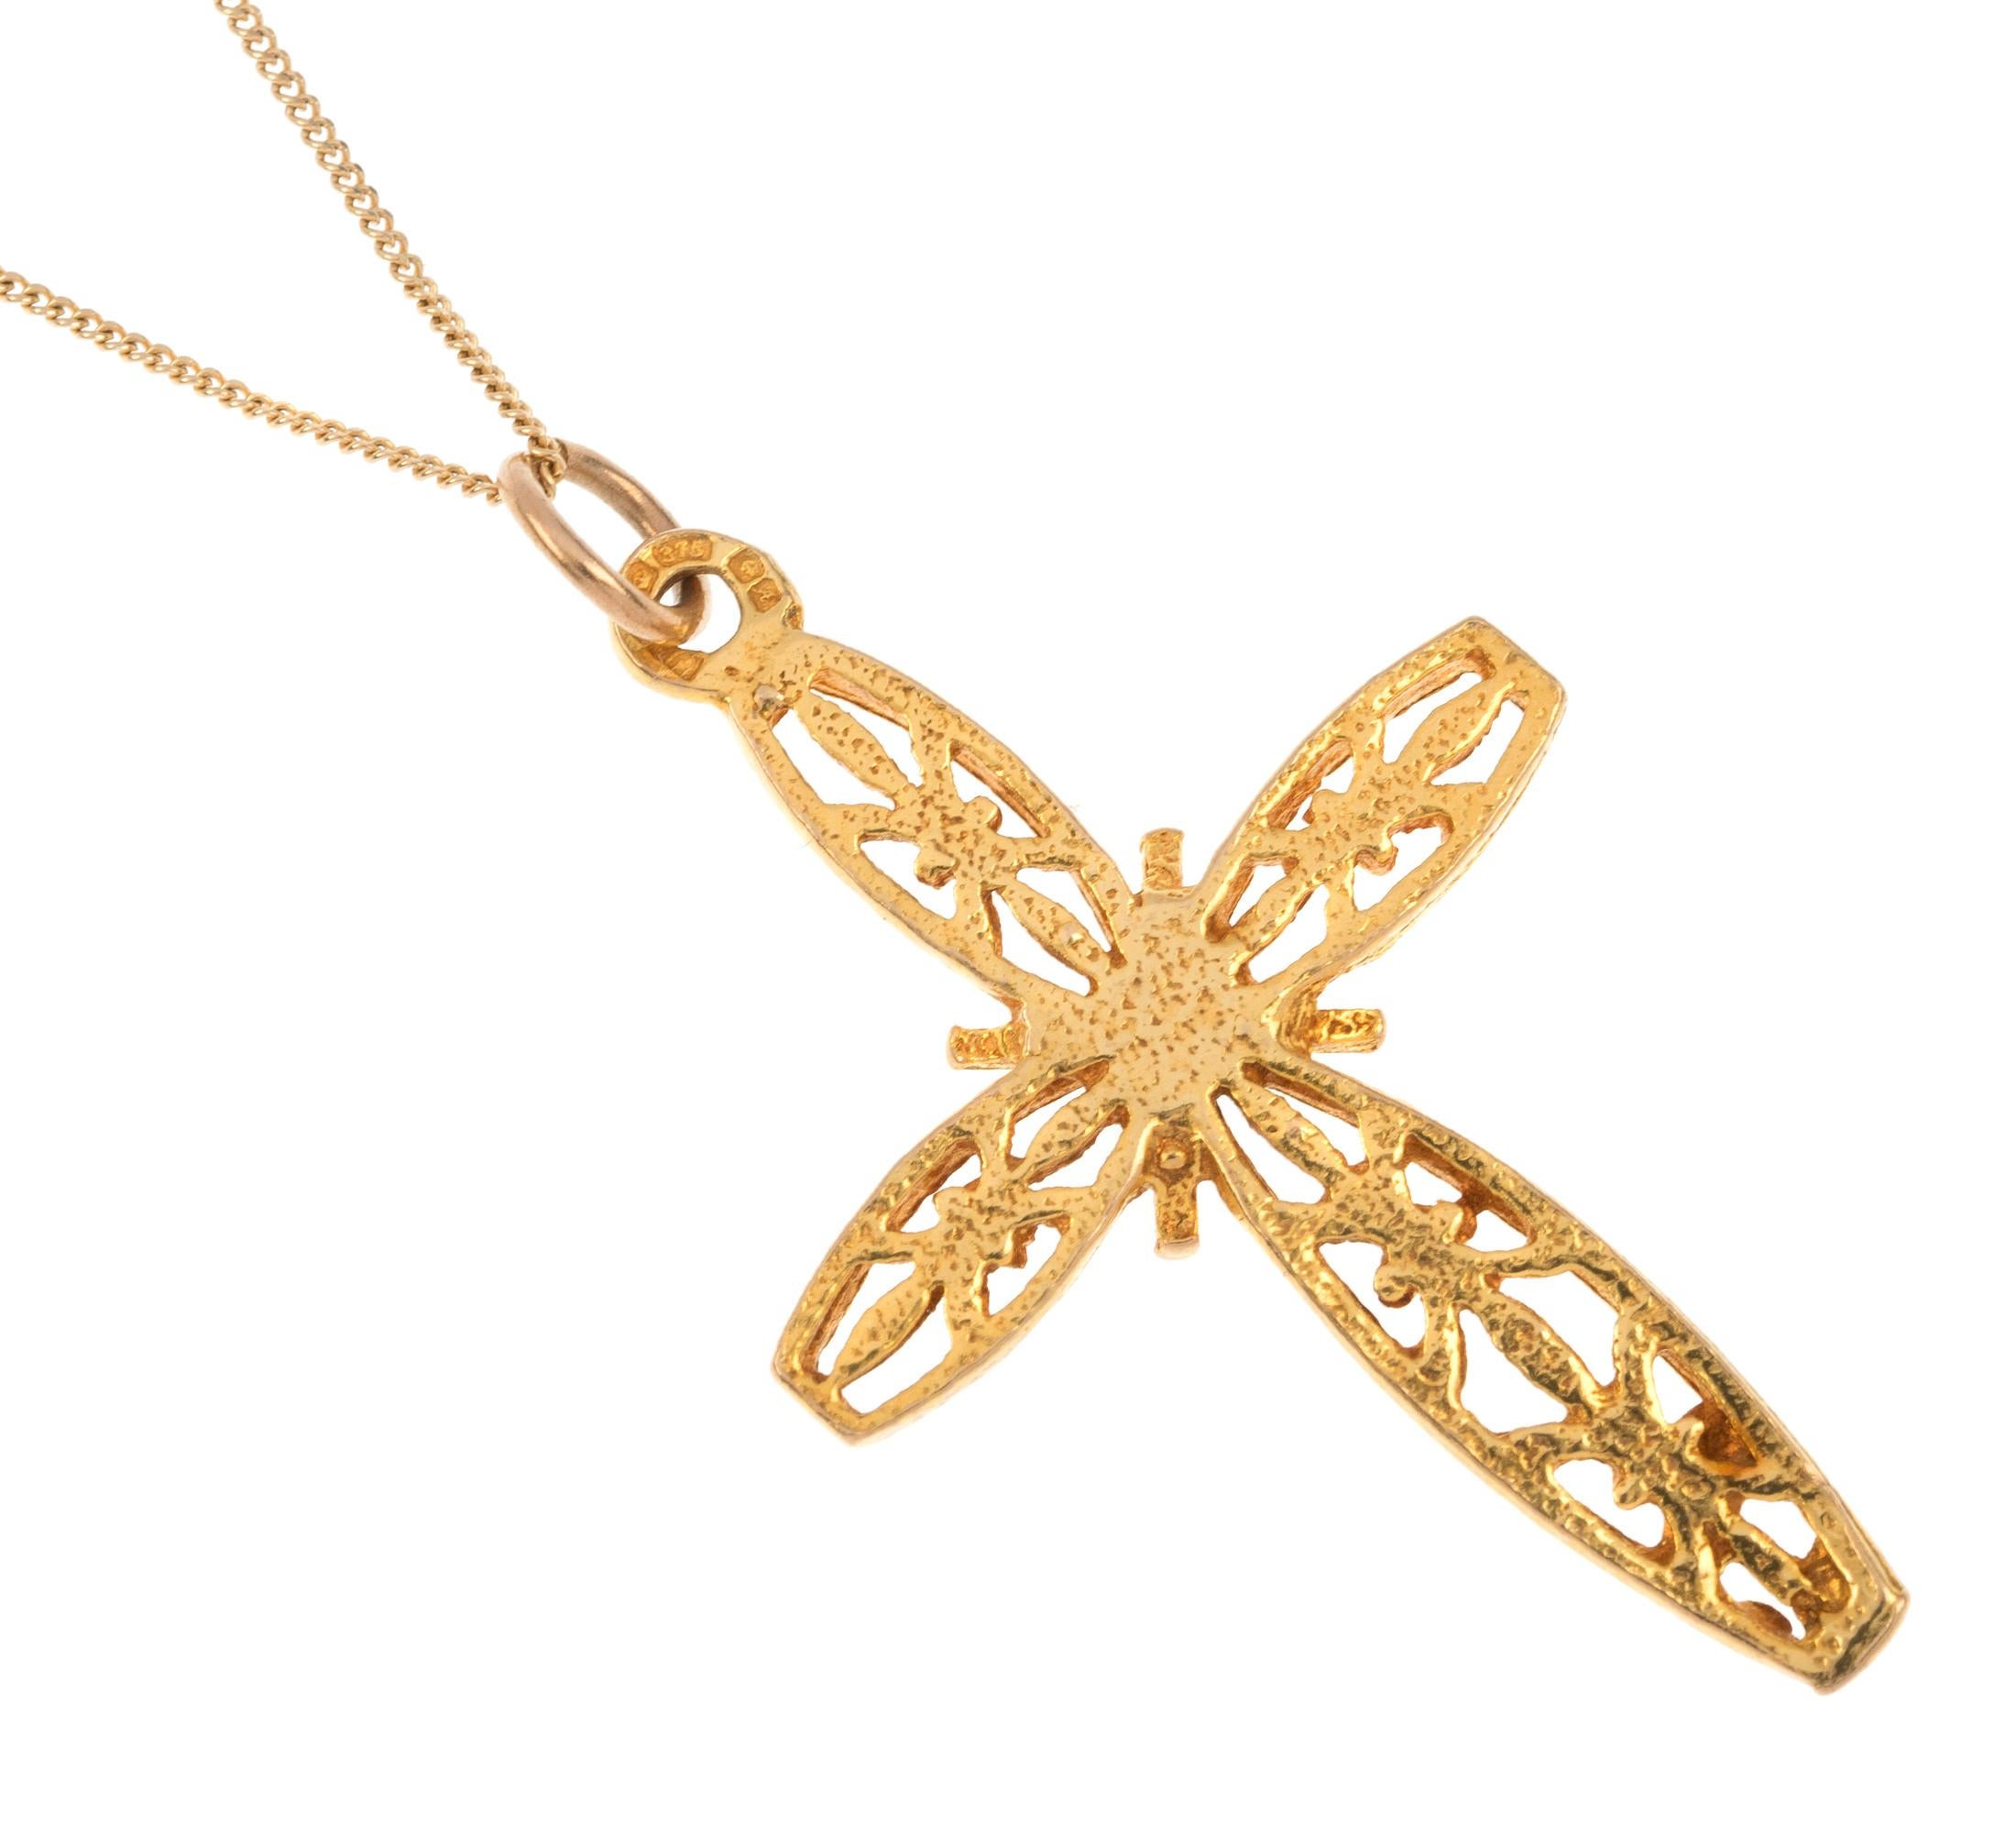 Medieval Vintage 1970s 9 Carat Yellow Gold Cross Pendant For Sale